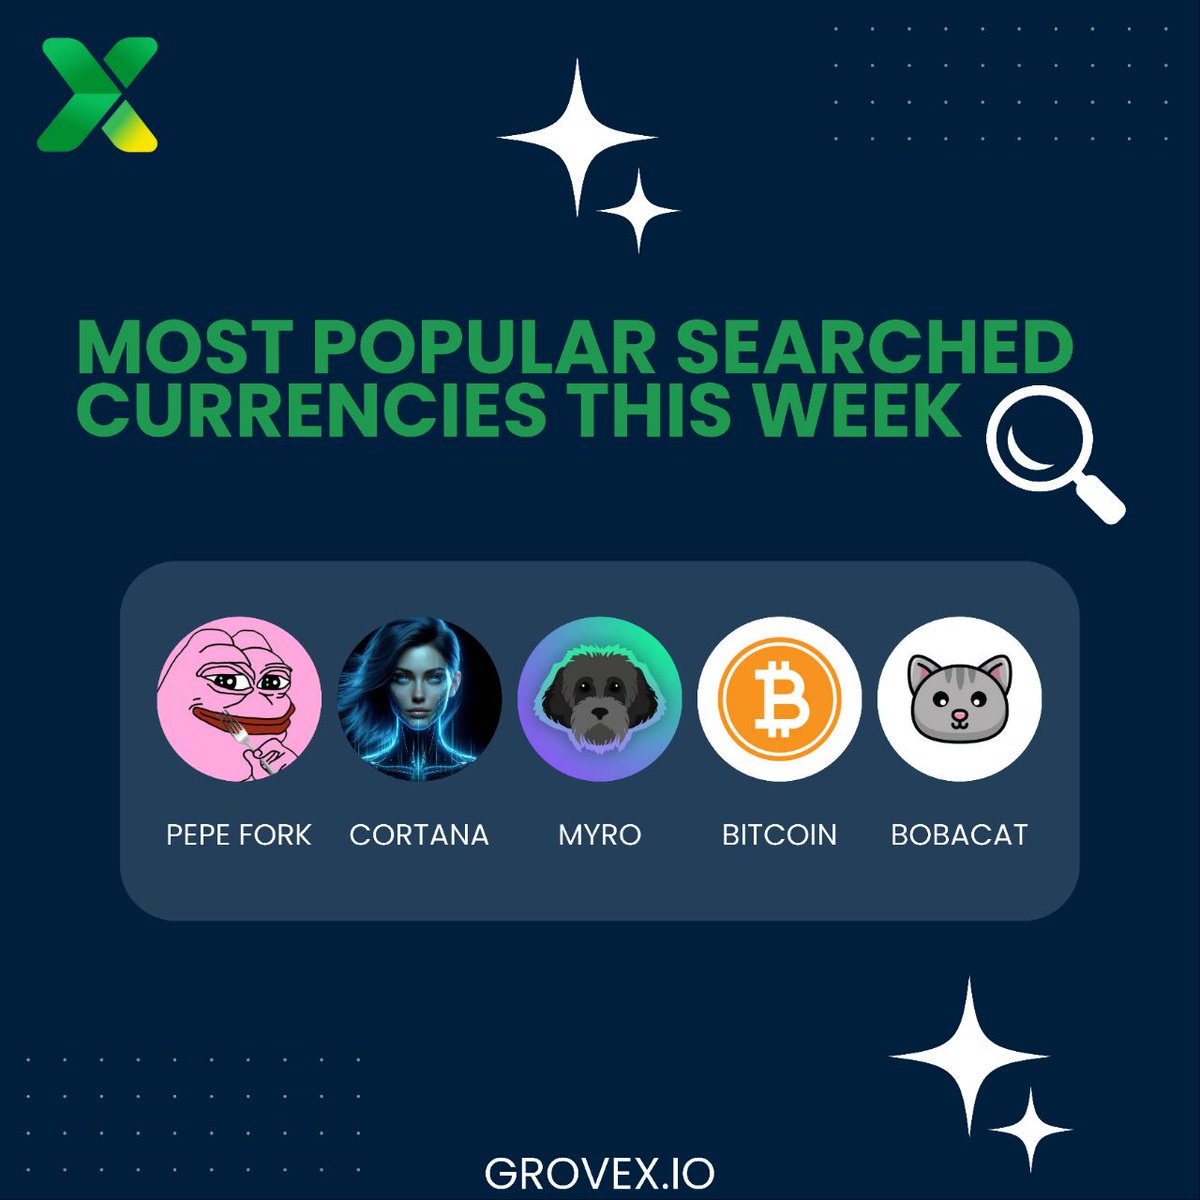 Check out this weeks most popular searched currencies at GroveX.io 

#PORK
#CORTANA
#MYRO
#BITCOIN 
#PSPS 

#GroveX #CryptoTrends #CryptoInvestment #CryptoNews